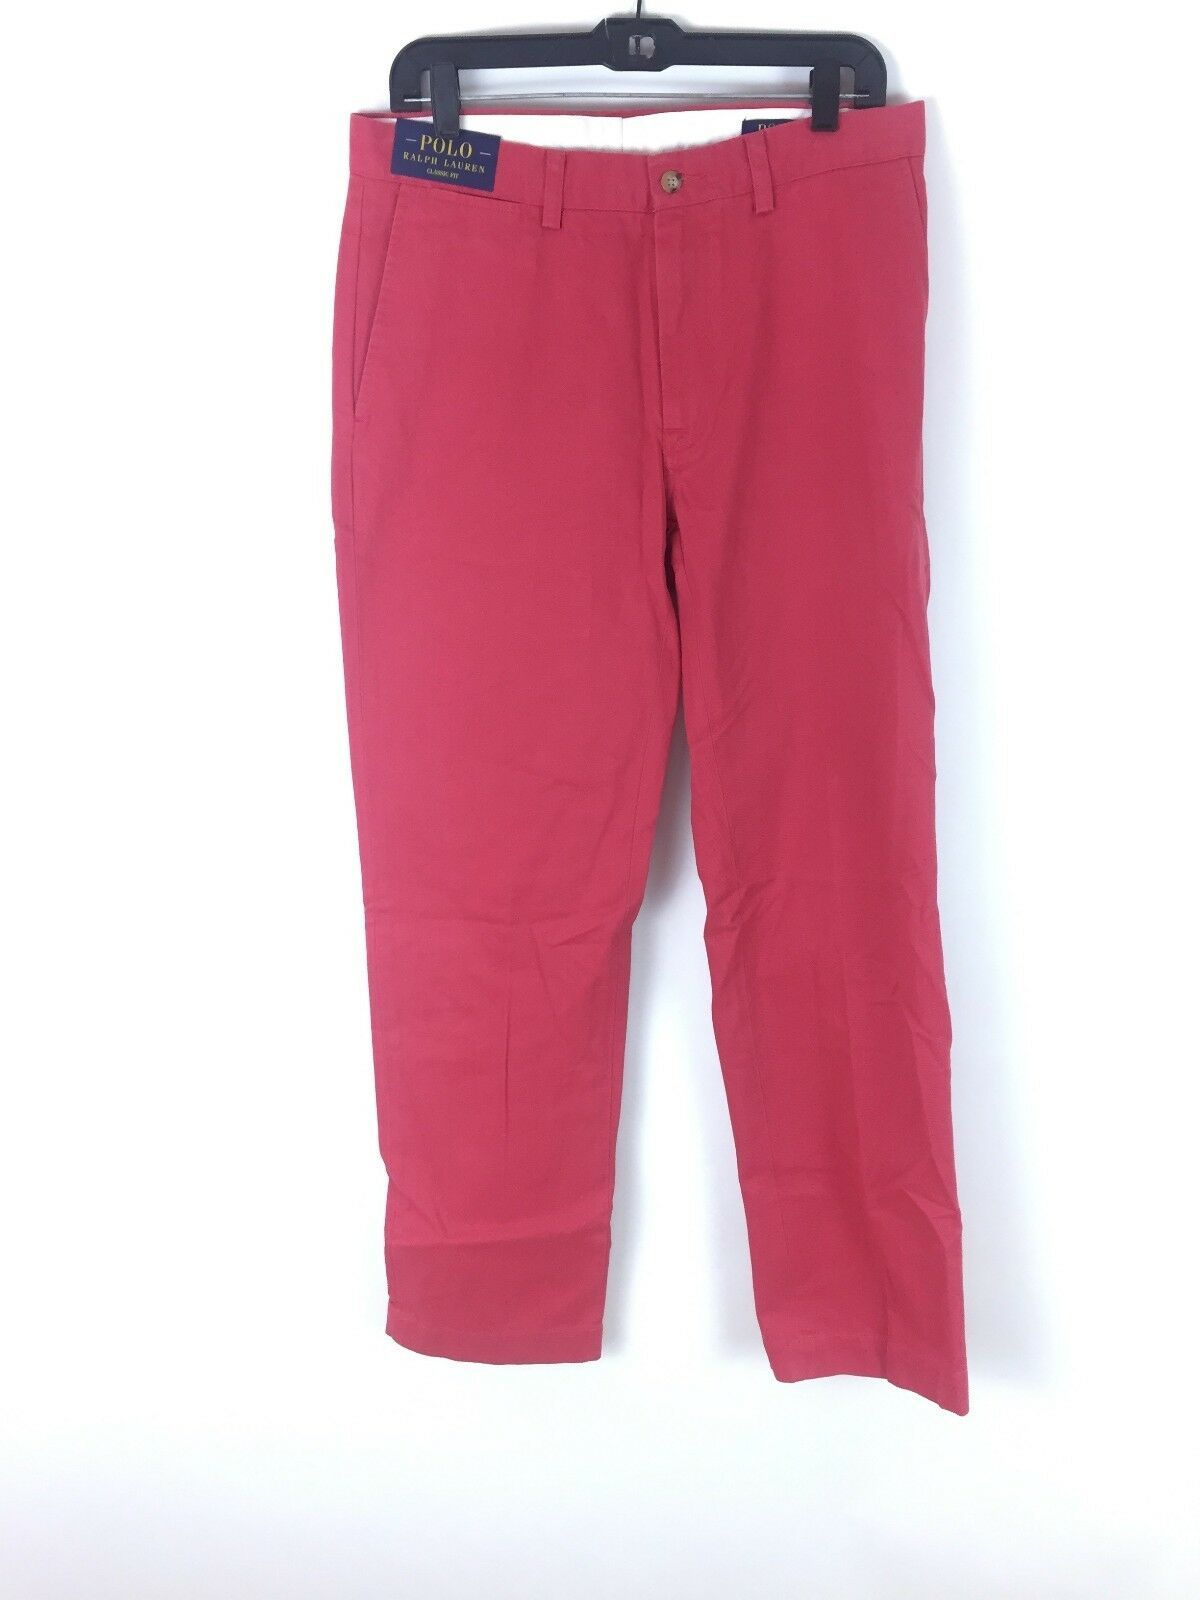 Primary image for Mens light red cotton chino causal Dress pants by Ralph Lauren Size 33 x 32 New